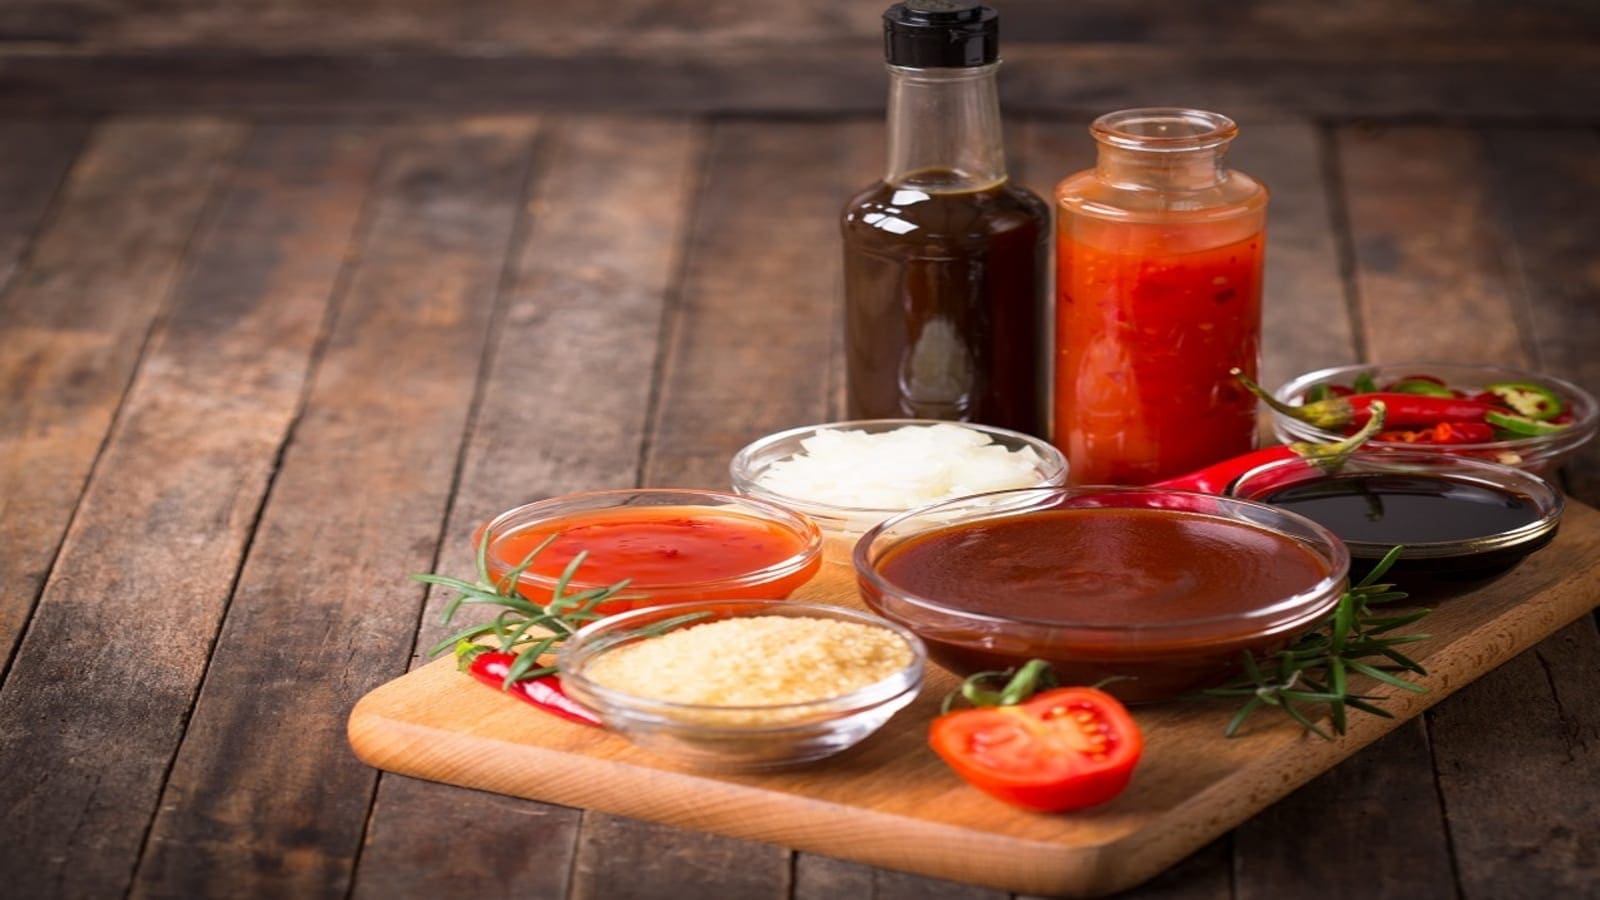 Solina snaps up French condiments brands Sauces et Créations and Atelier D2i